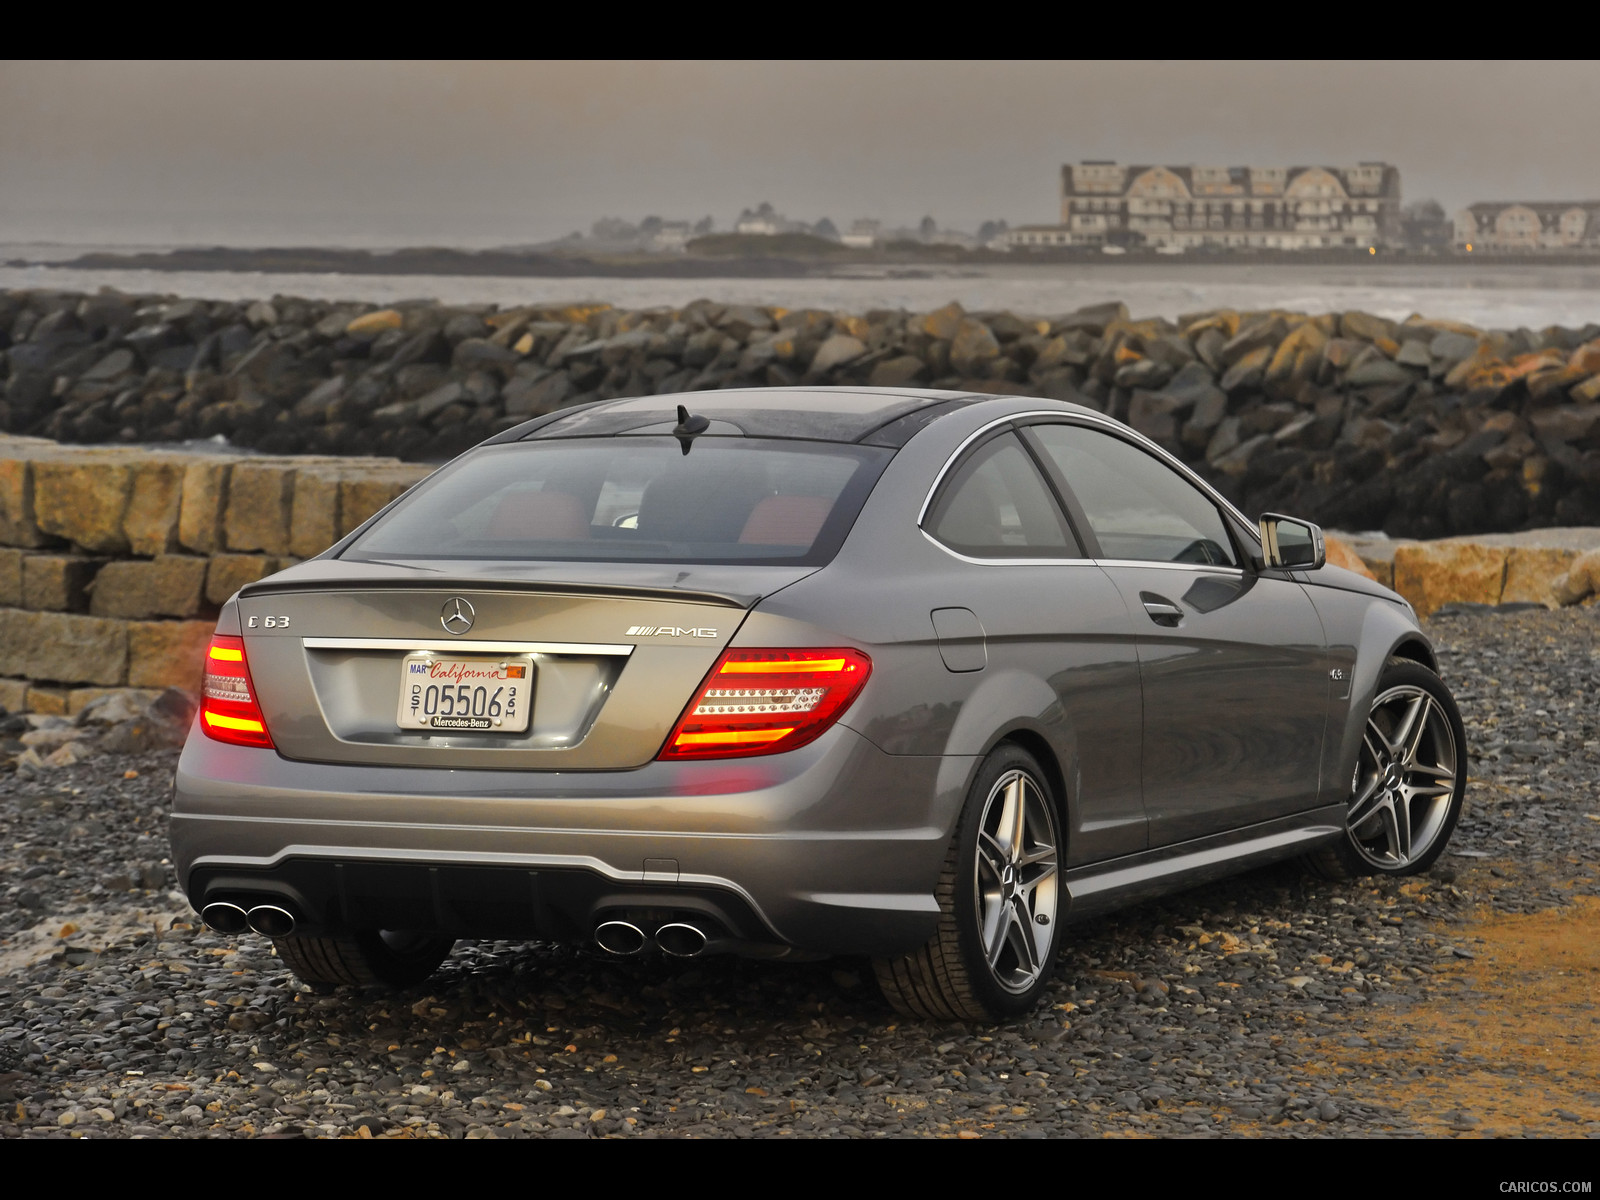 Mercedes-Benz C63 AMG Coupe (2012) with MCT transmission - , #3 of 64